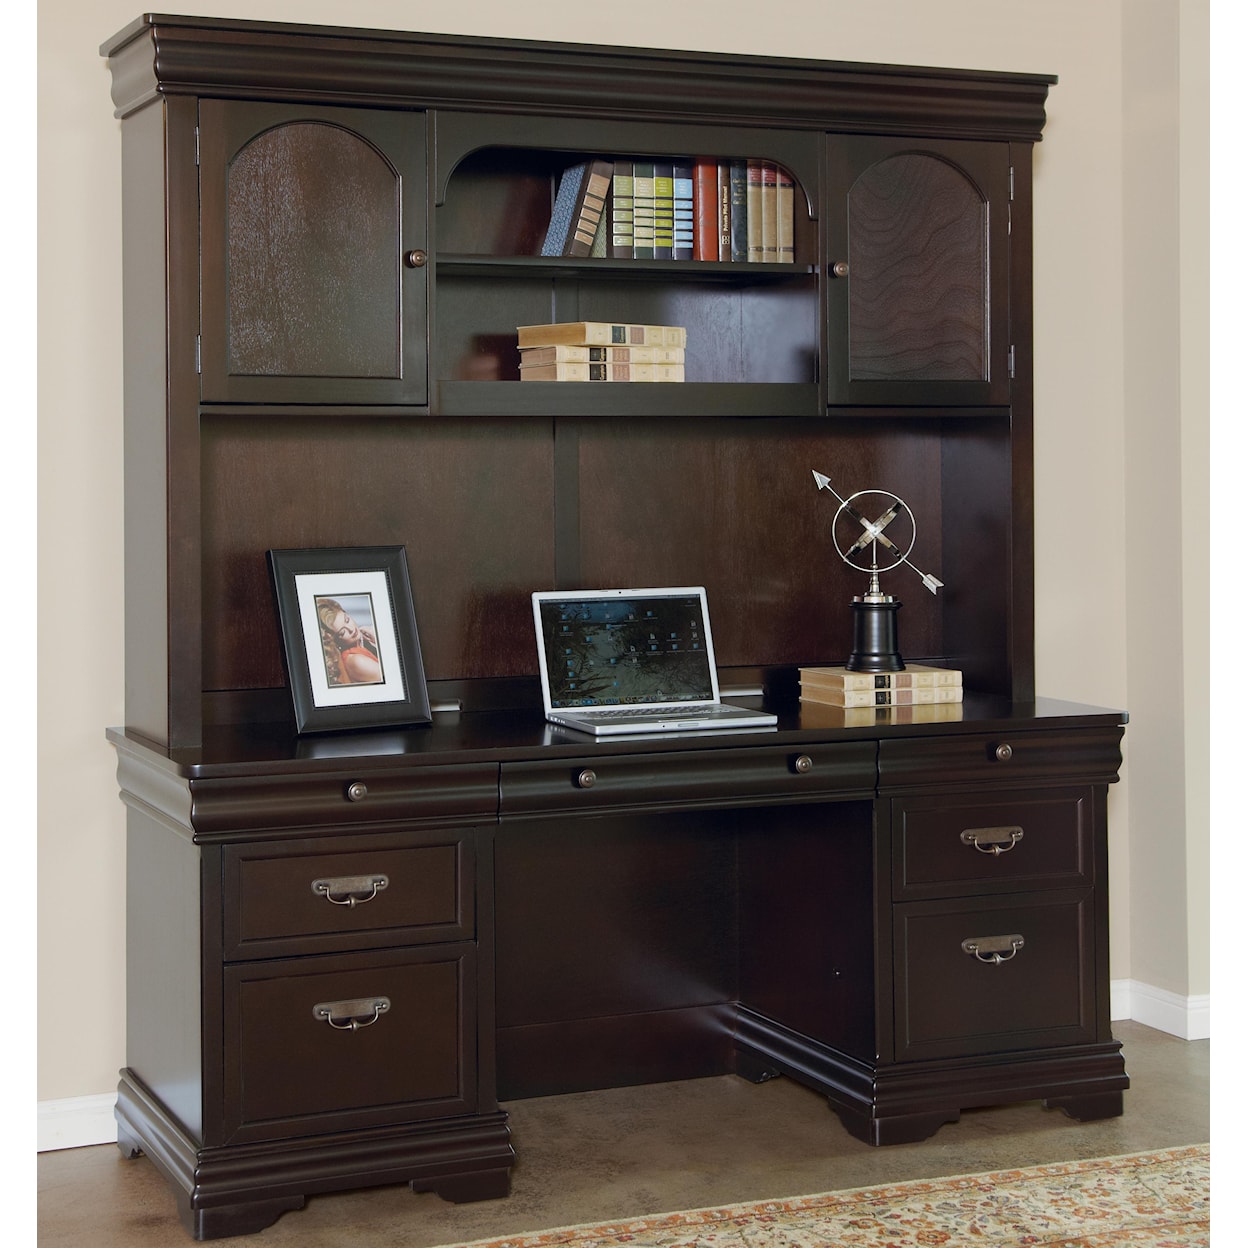 Martin Home Furnishings Beaumont Credenza with Hutch